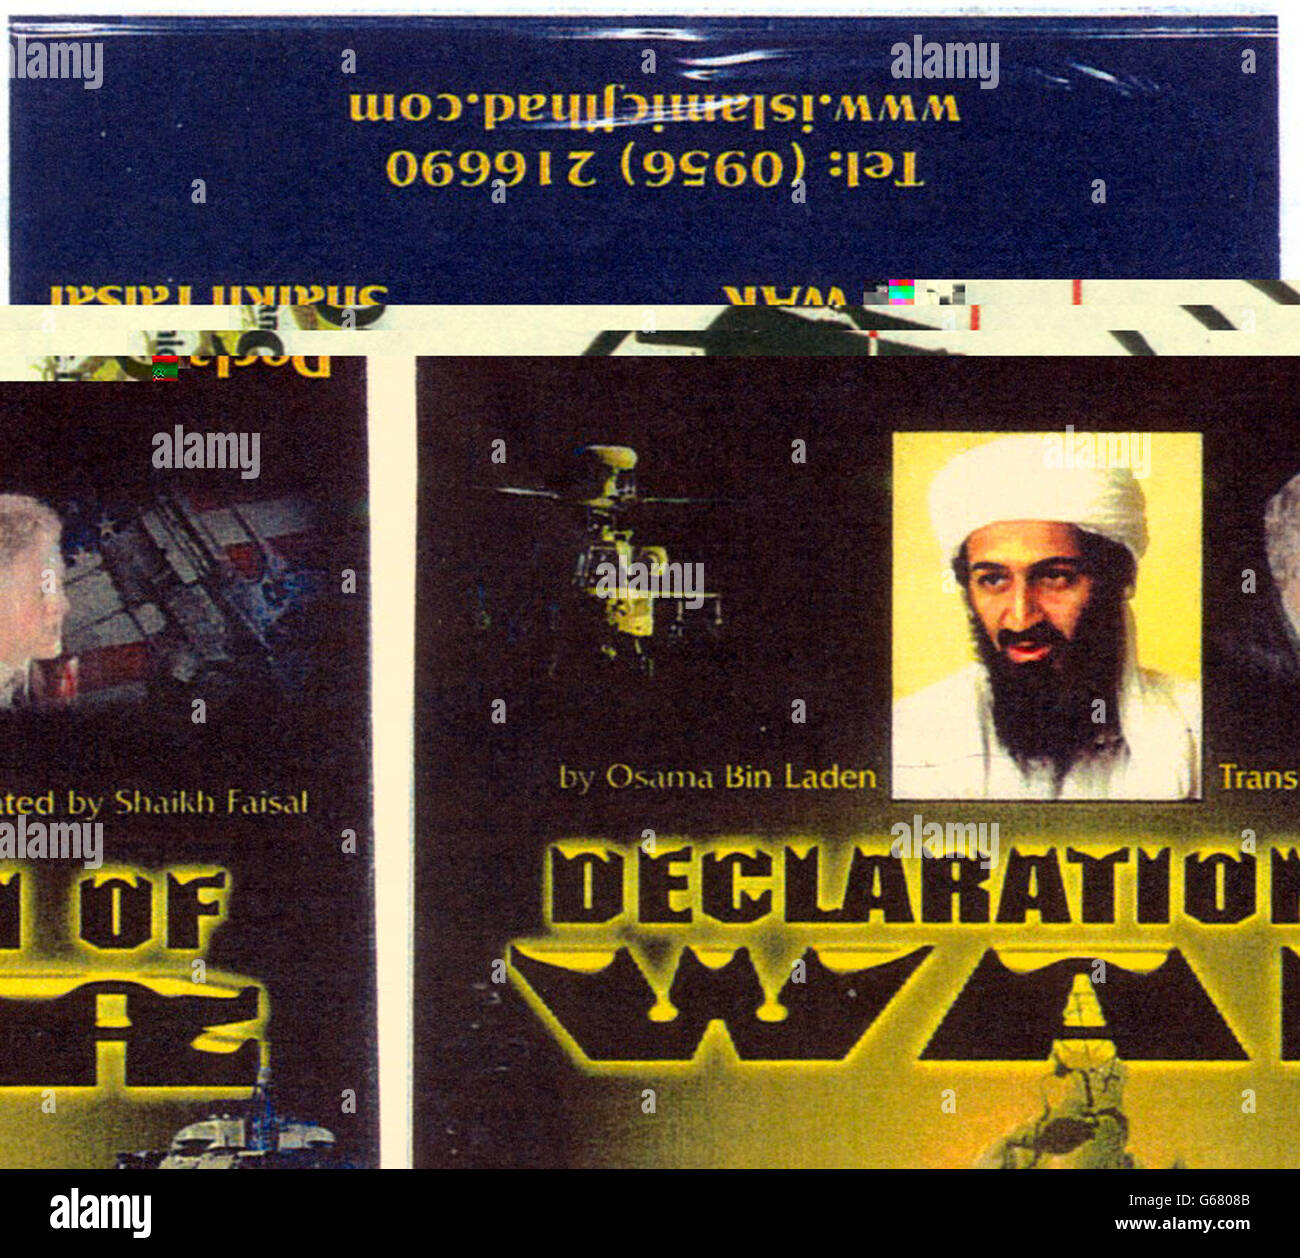 The front cover of a recording by self-styled cleric Abdullah el-Faisal, 39, who has been, convicted of soliciting murder at the Old Bailey. * 'Sheikh' Abdullah el-Faisal, a convert to Islam, was arrested at his Stratford home in February 2002 after he produced audio tapes in which he urged young Muslims to wage a holy war against Jews and the West. Stock Photo